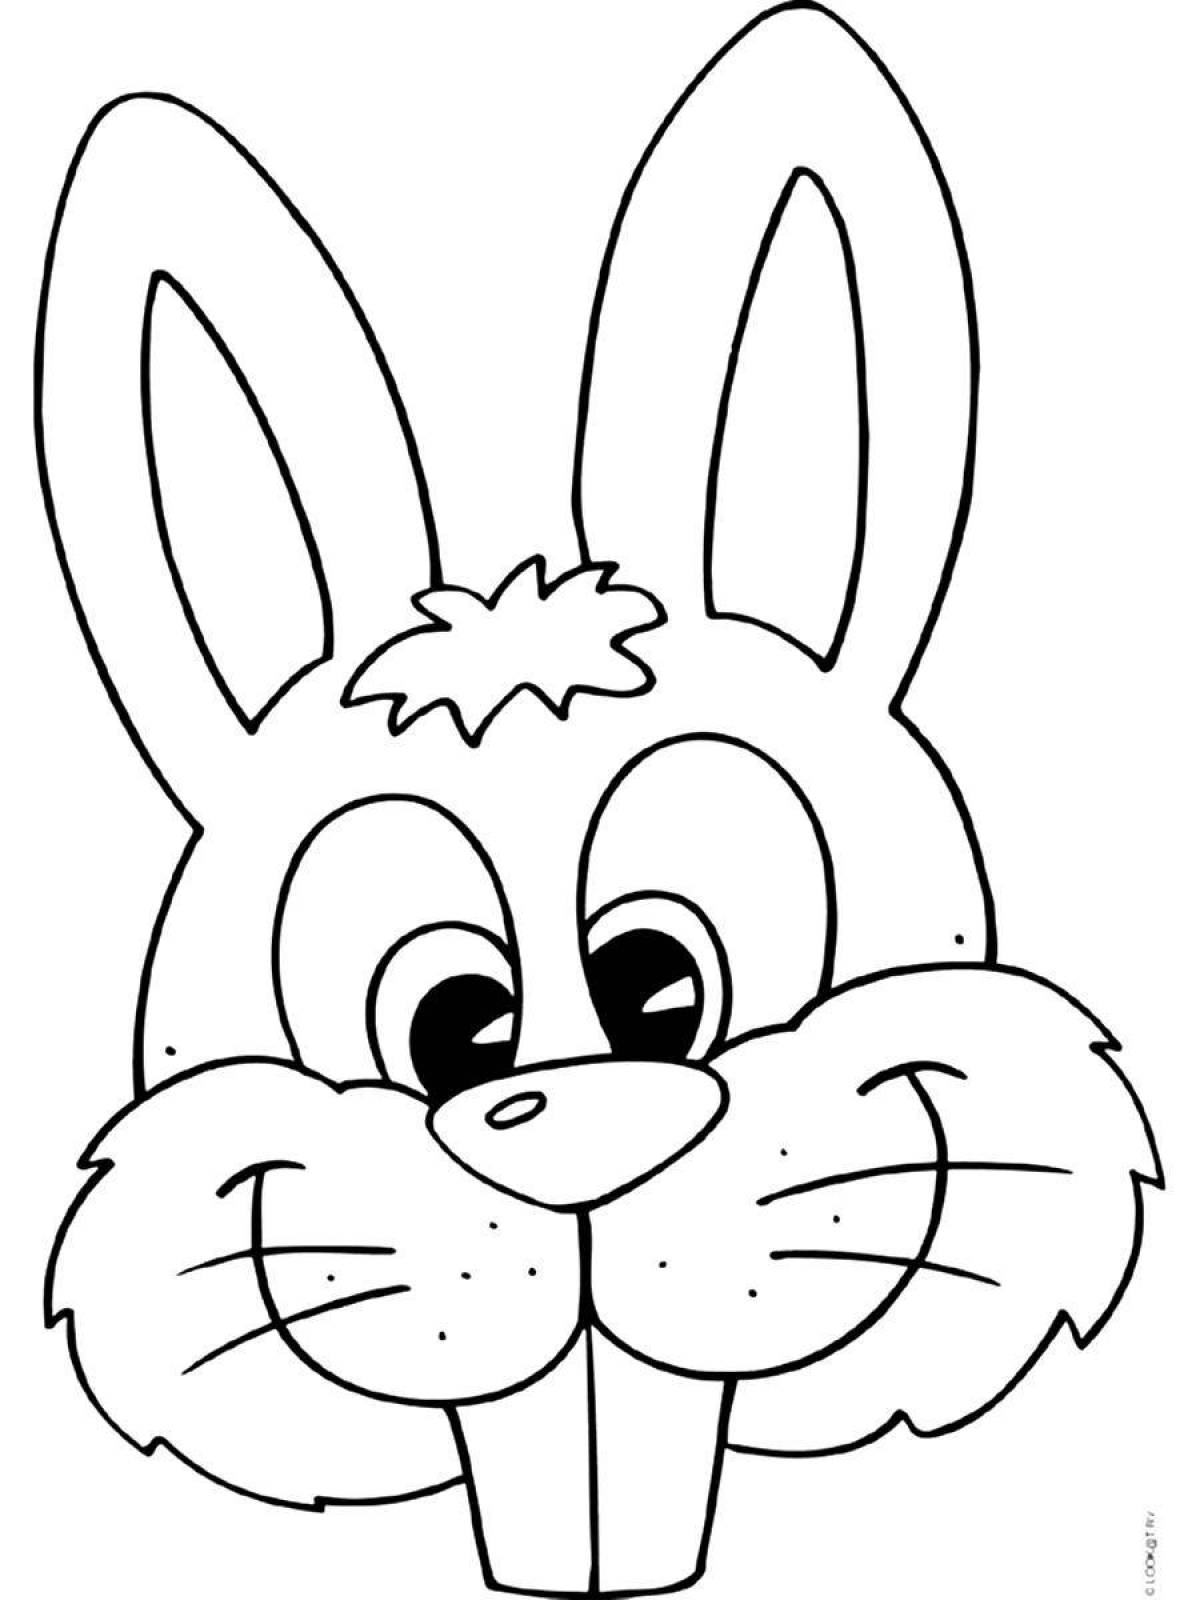 Snuggly coloring page bunny face